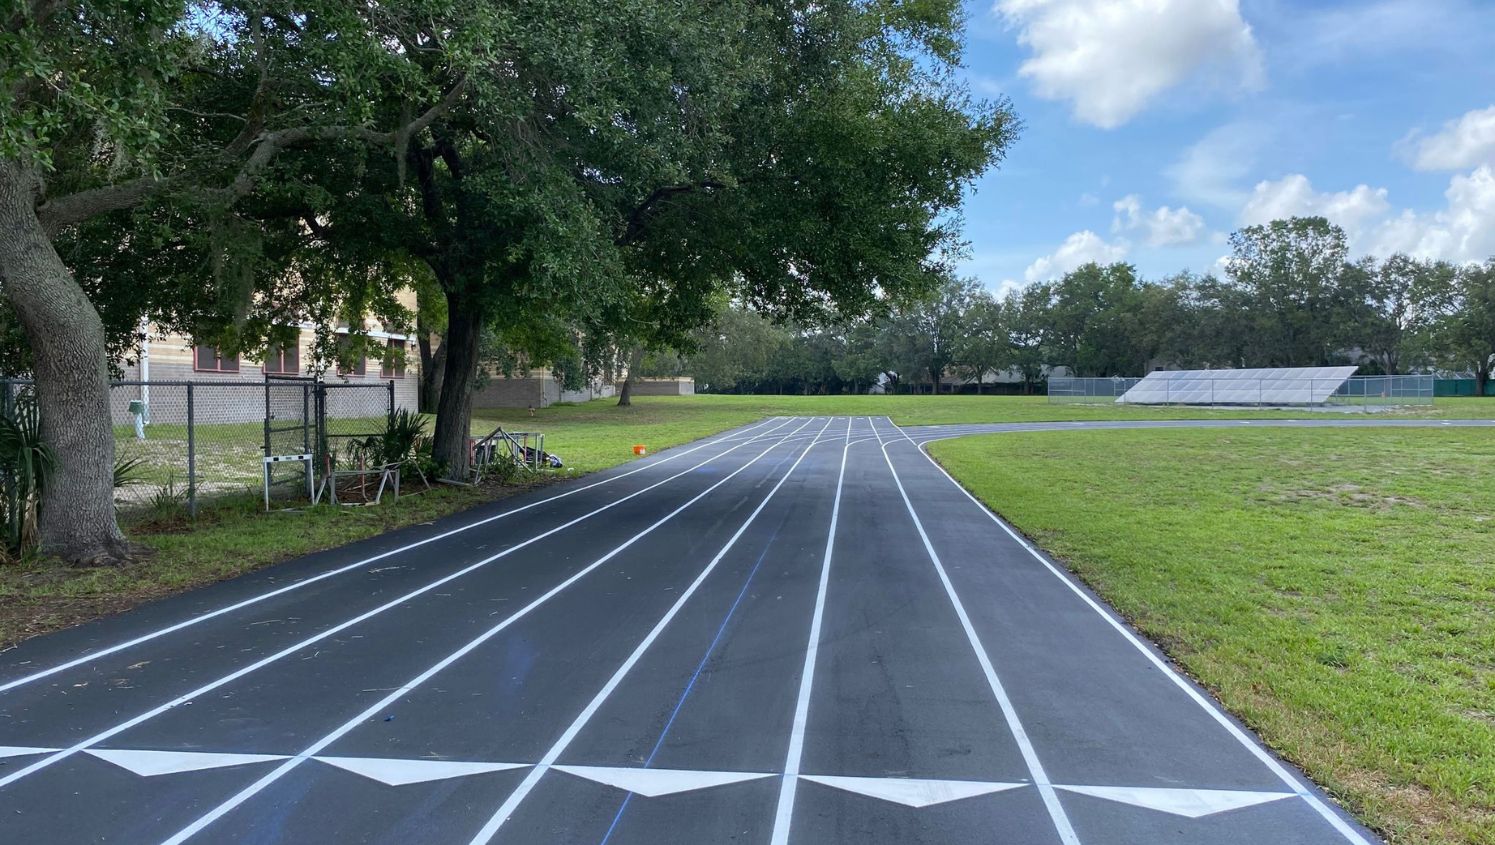 asphalt sealcoating project for local elementary school track